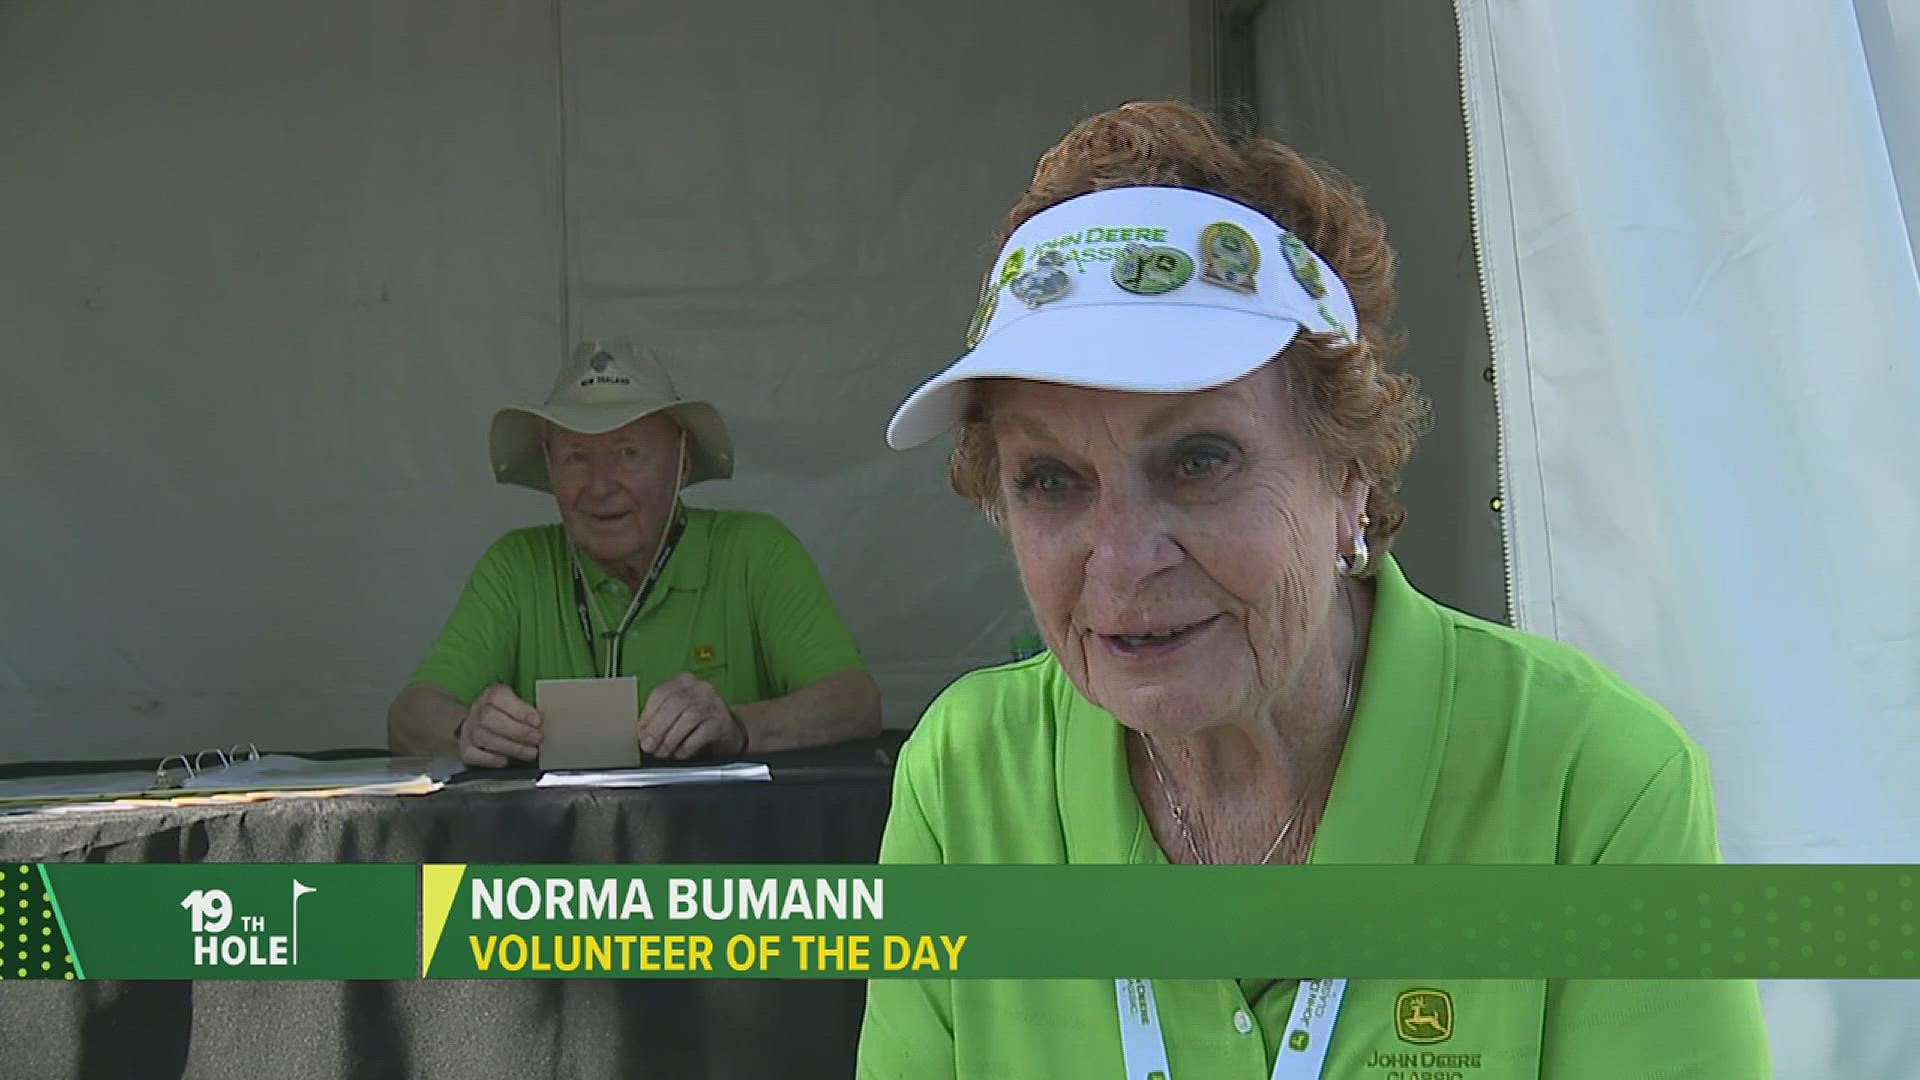 The 19th Hole's first Volunteer of the Day for the 2022 John Deere Classic is Norma Bumann, who has been helping everyone find their way around the course.